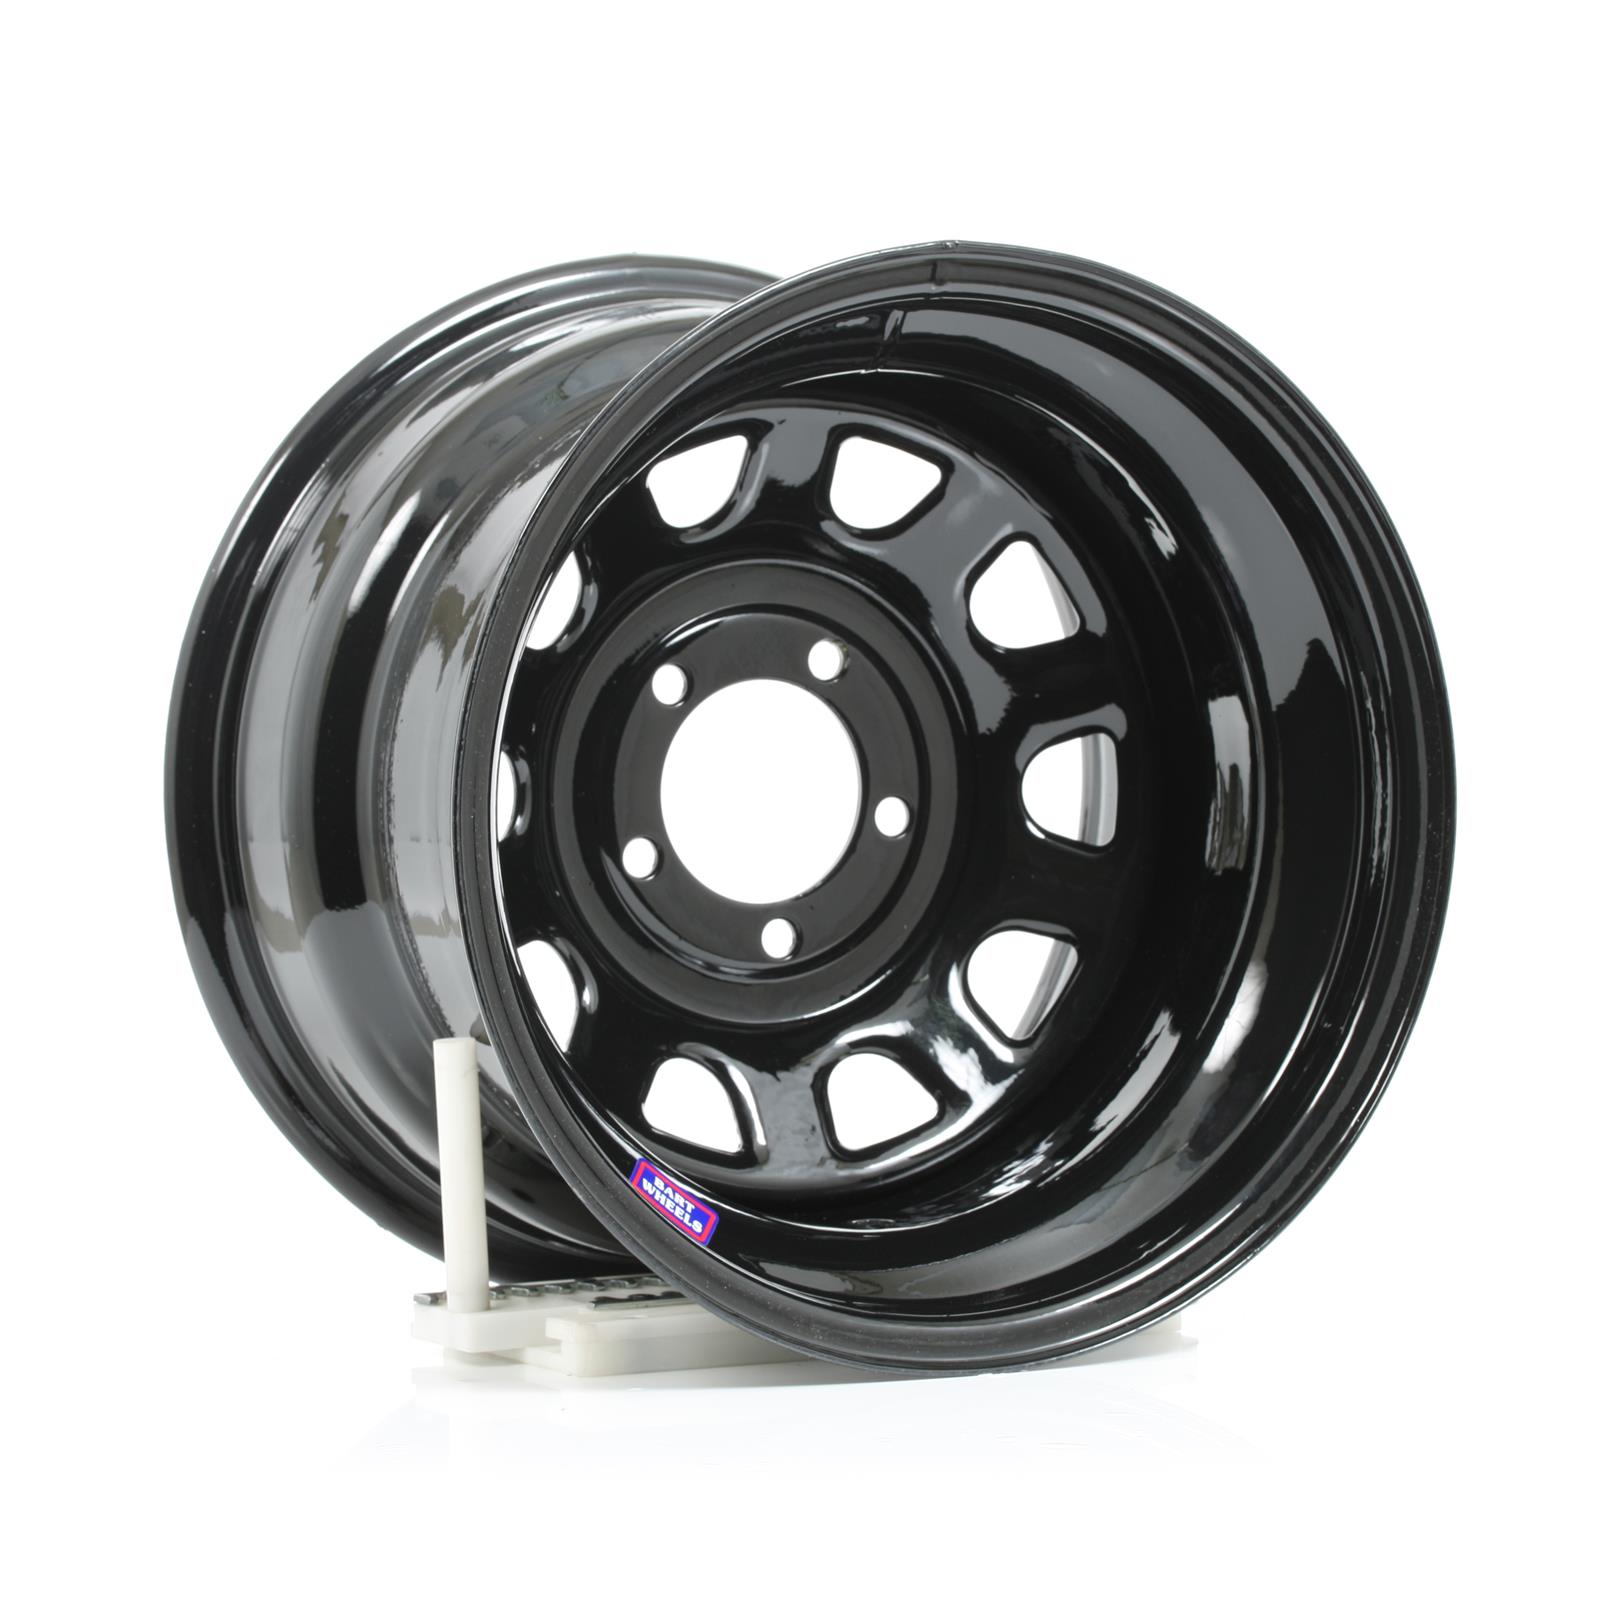 Free Shipping - Bart Wheels D Trucker Black Wheels with qualifying orders o...